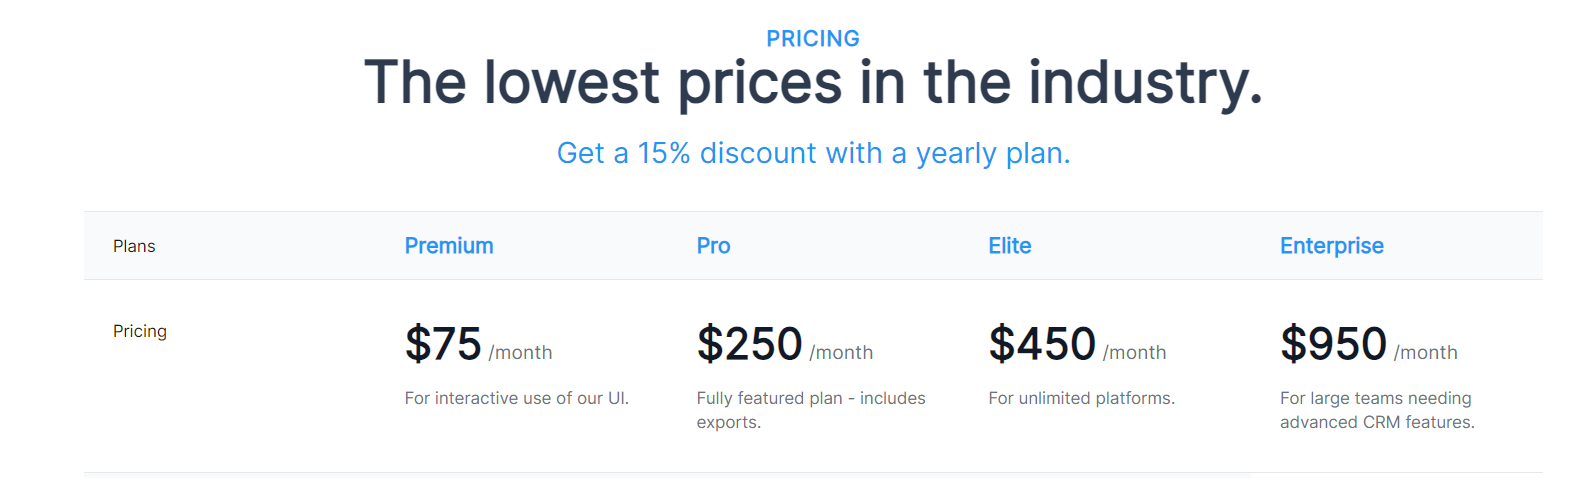 pricing storeleads